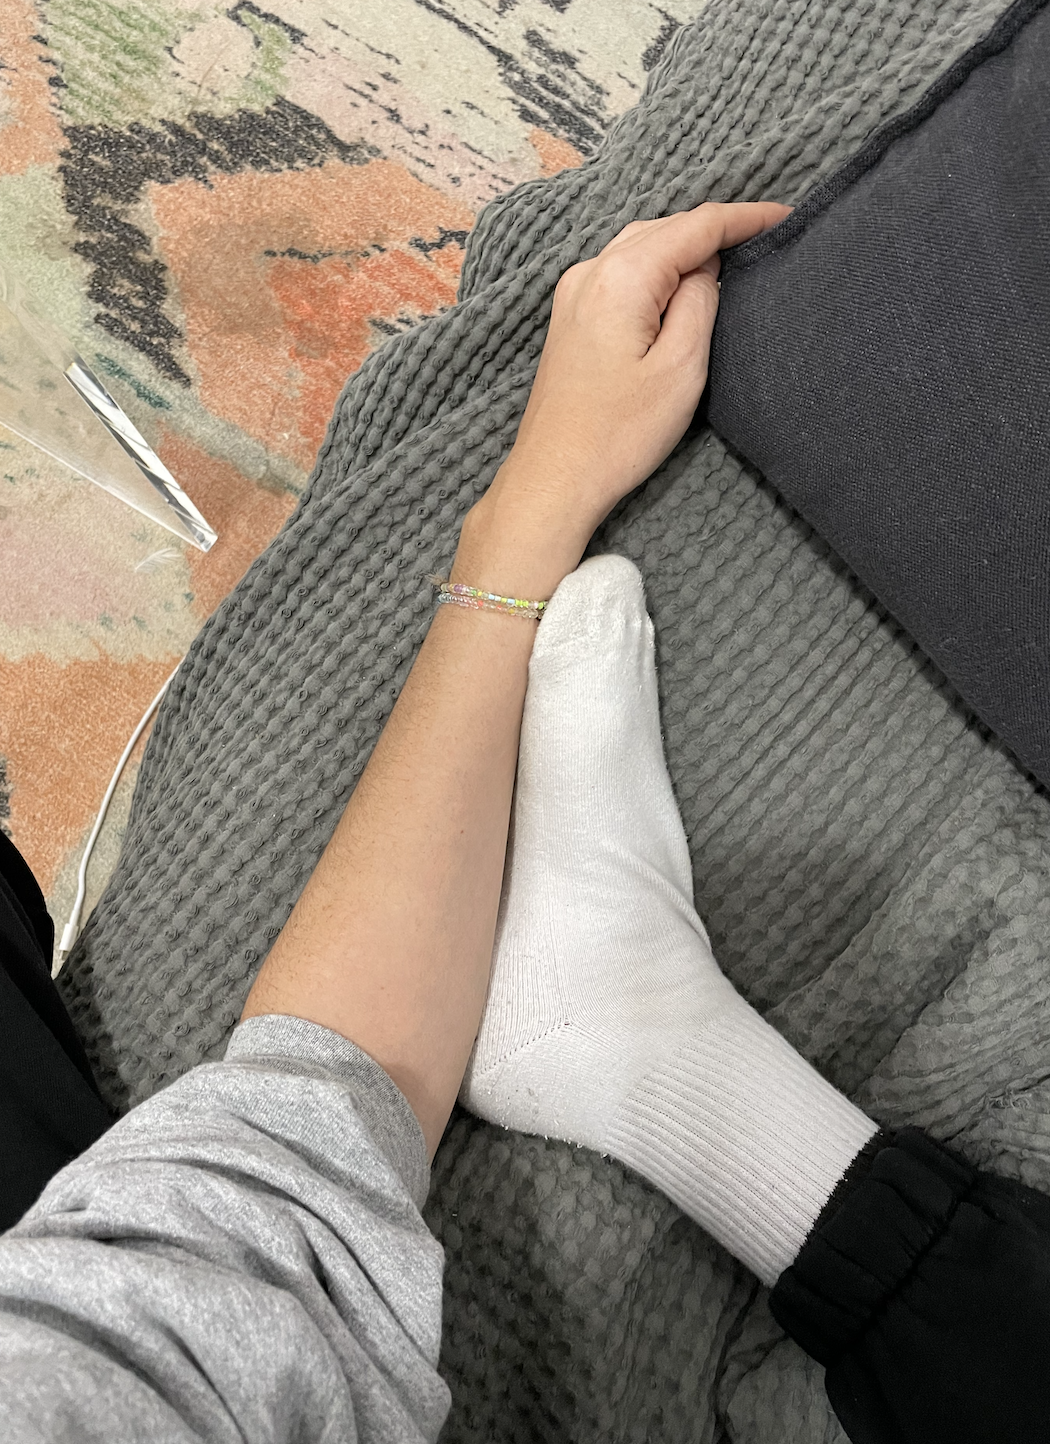 A foot and a length alongside each other